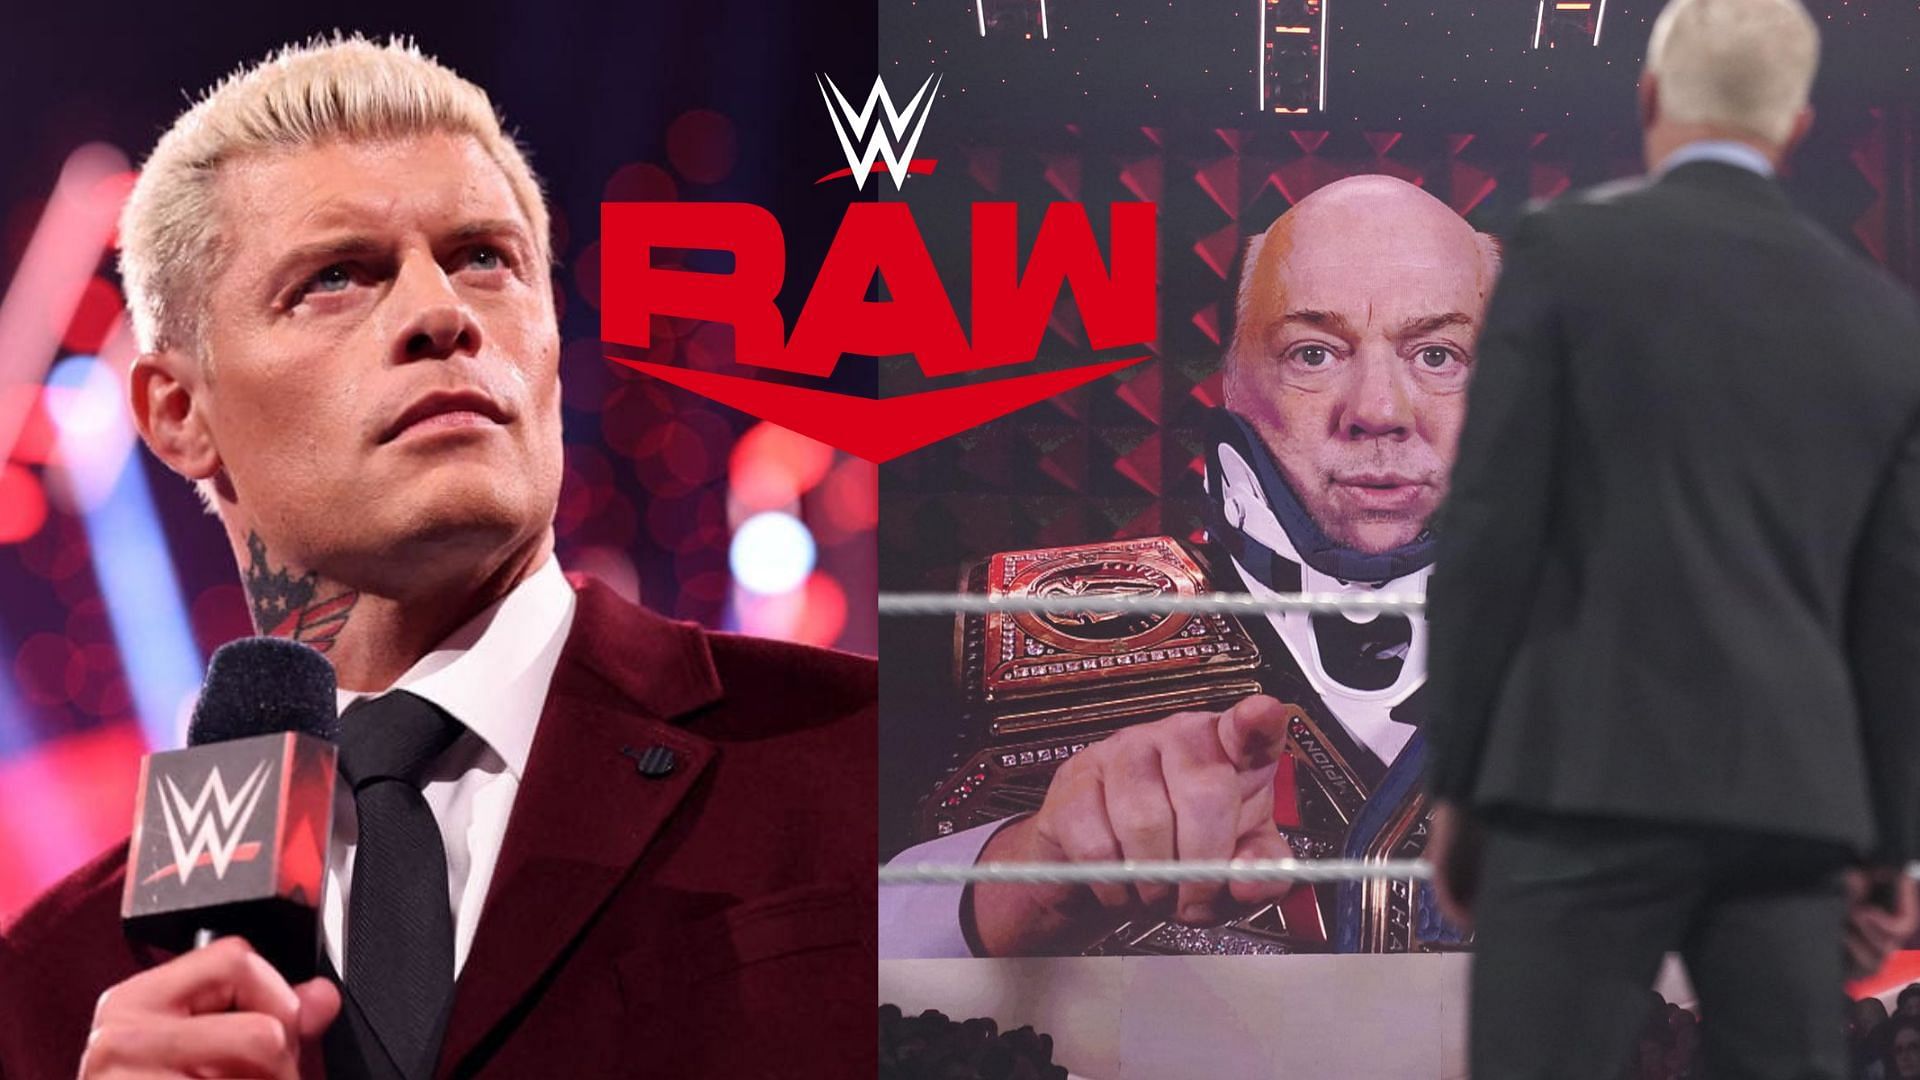 Cody Rhodes and Paul Heyman had another promo on WWE RAW.